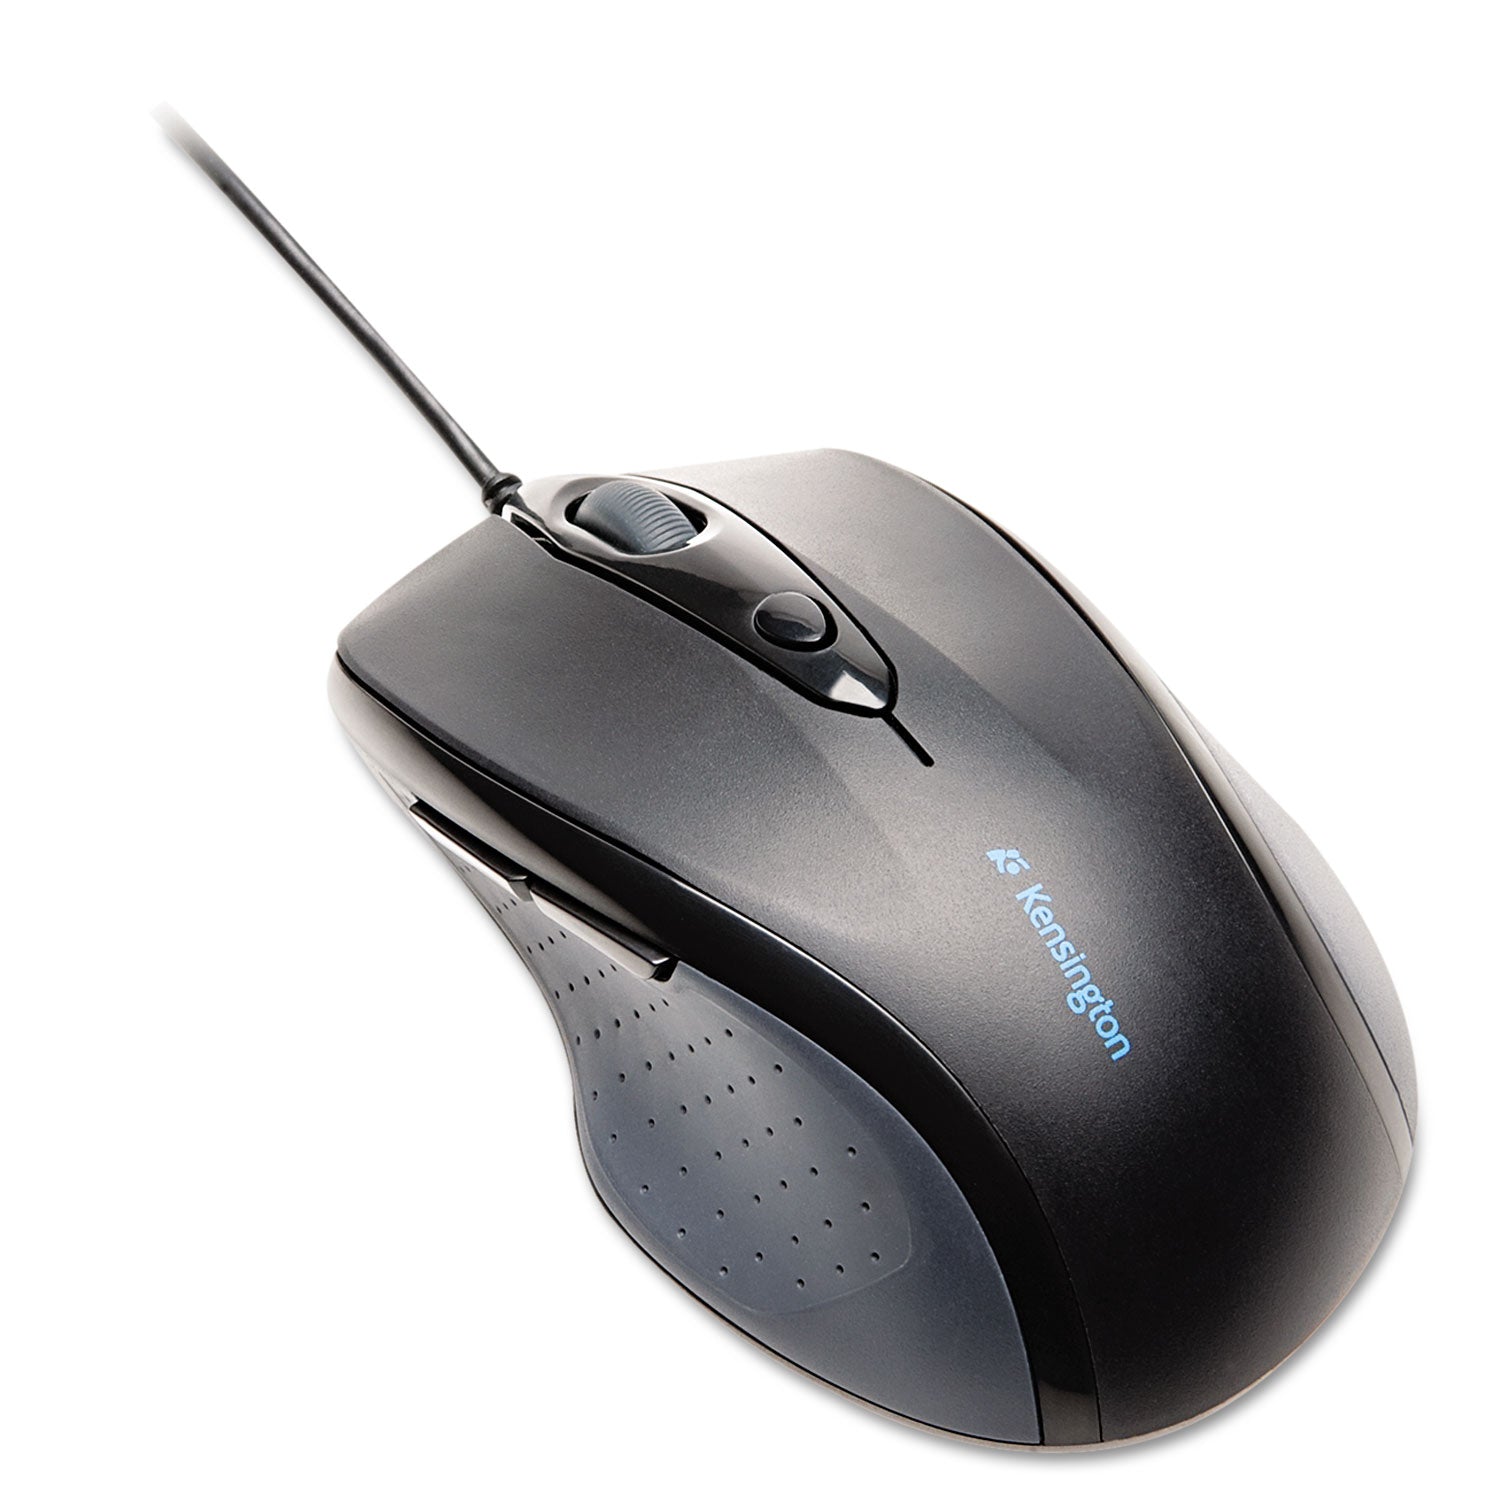 Pro Fit Wired Full-Size Mouse, USB 2.0, Right Hand Use, Black - 